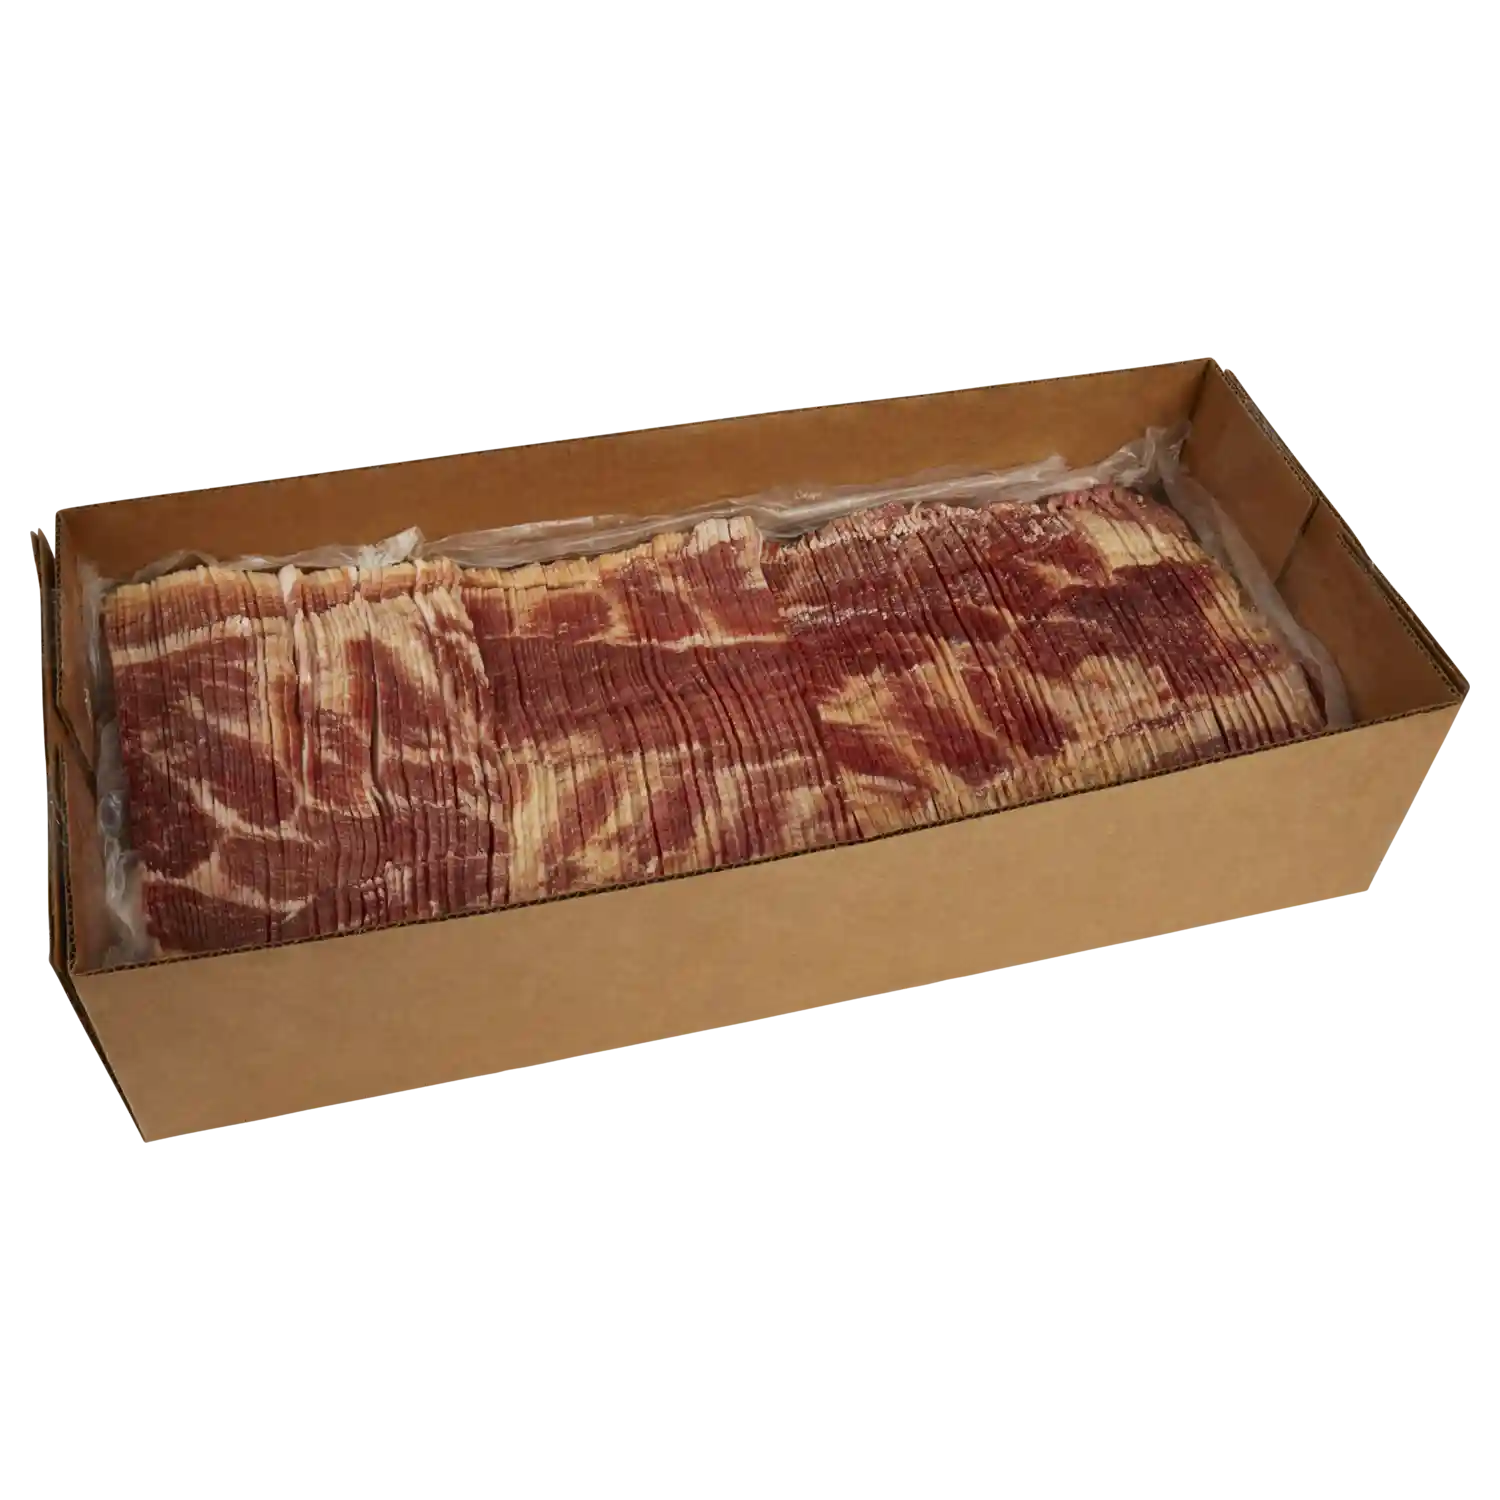 Wright® Brand Naturally Hickory Smoked Thin Sliced Bacon, Bulk, 30 Lbs, 18-22 Slices per Pound, Frozen_image_41